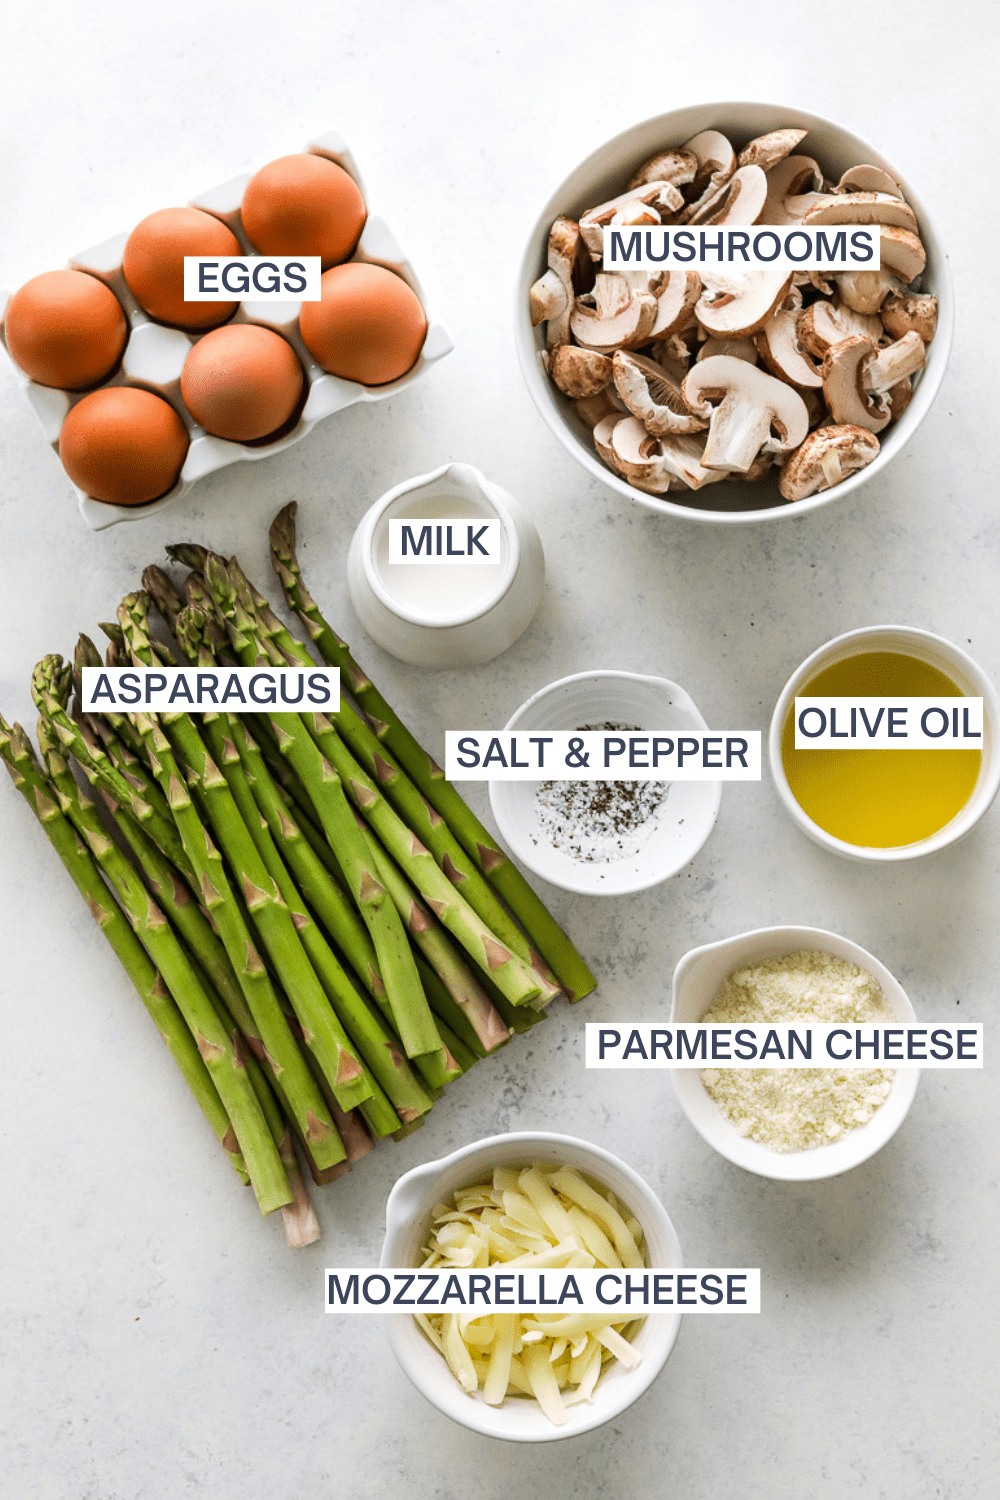 Ingredients for mushroom asparagus quiche with labels over each ingredient.